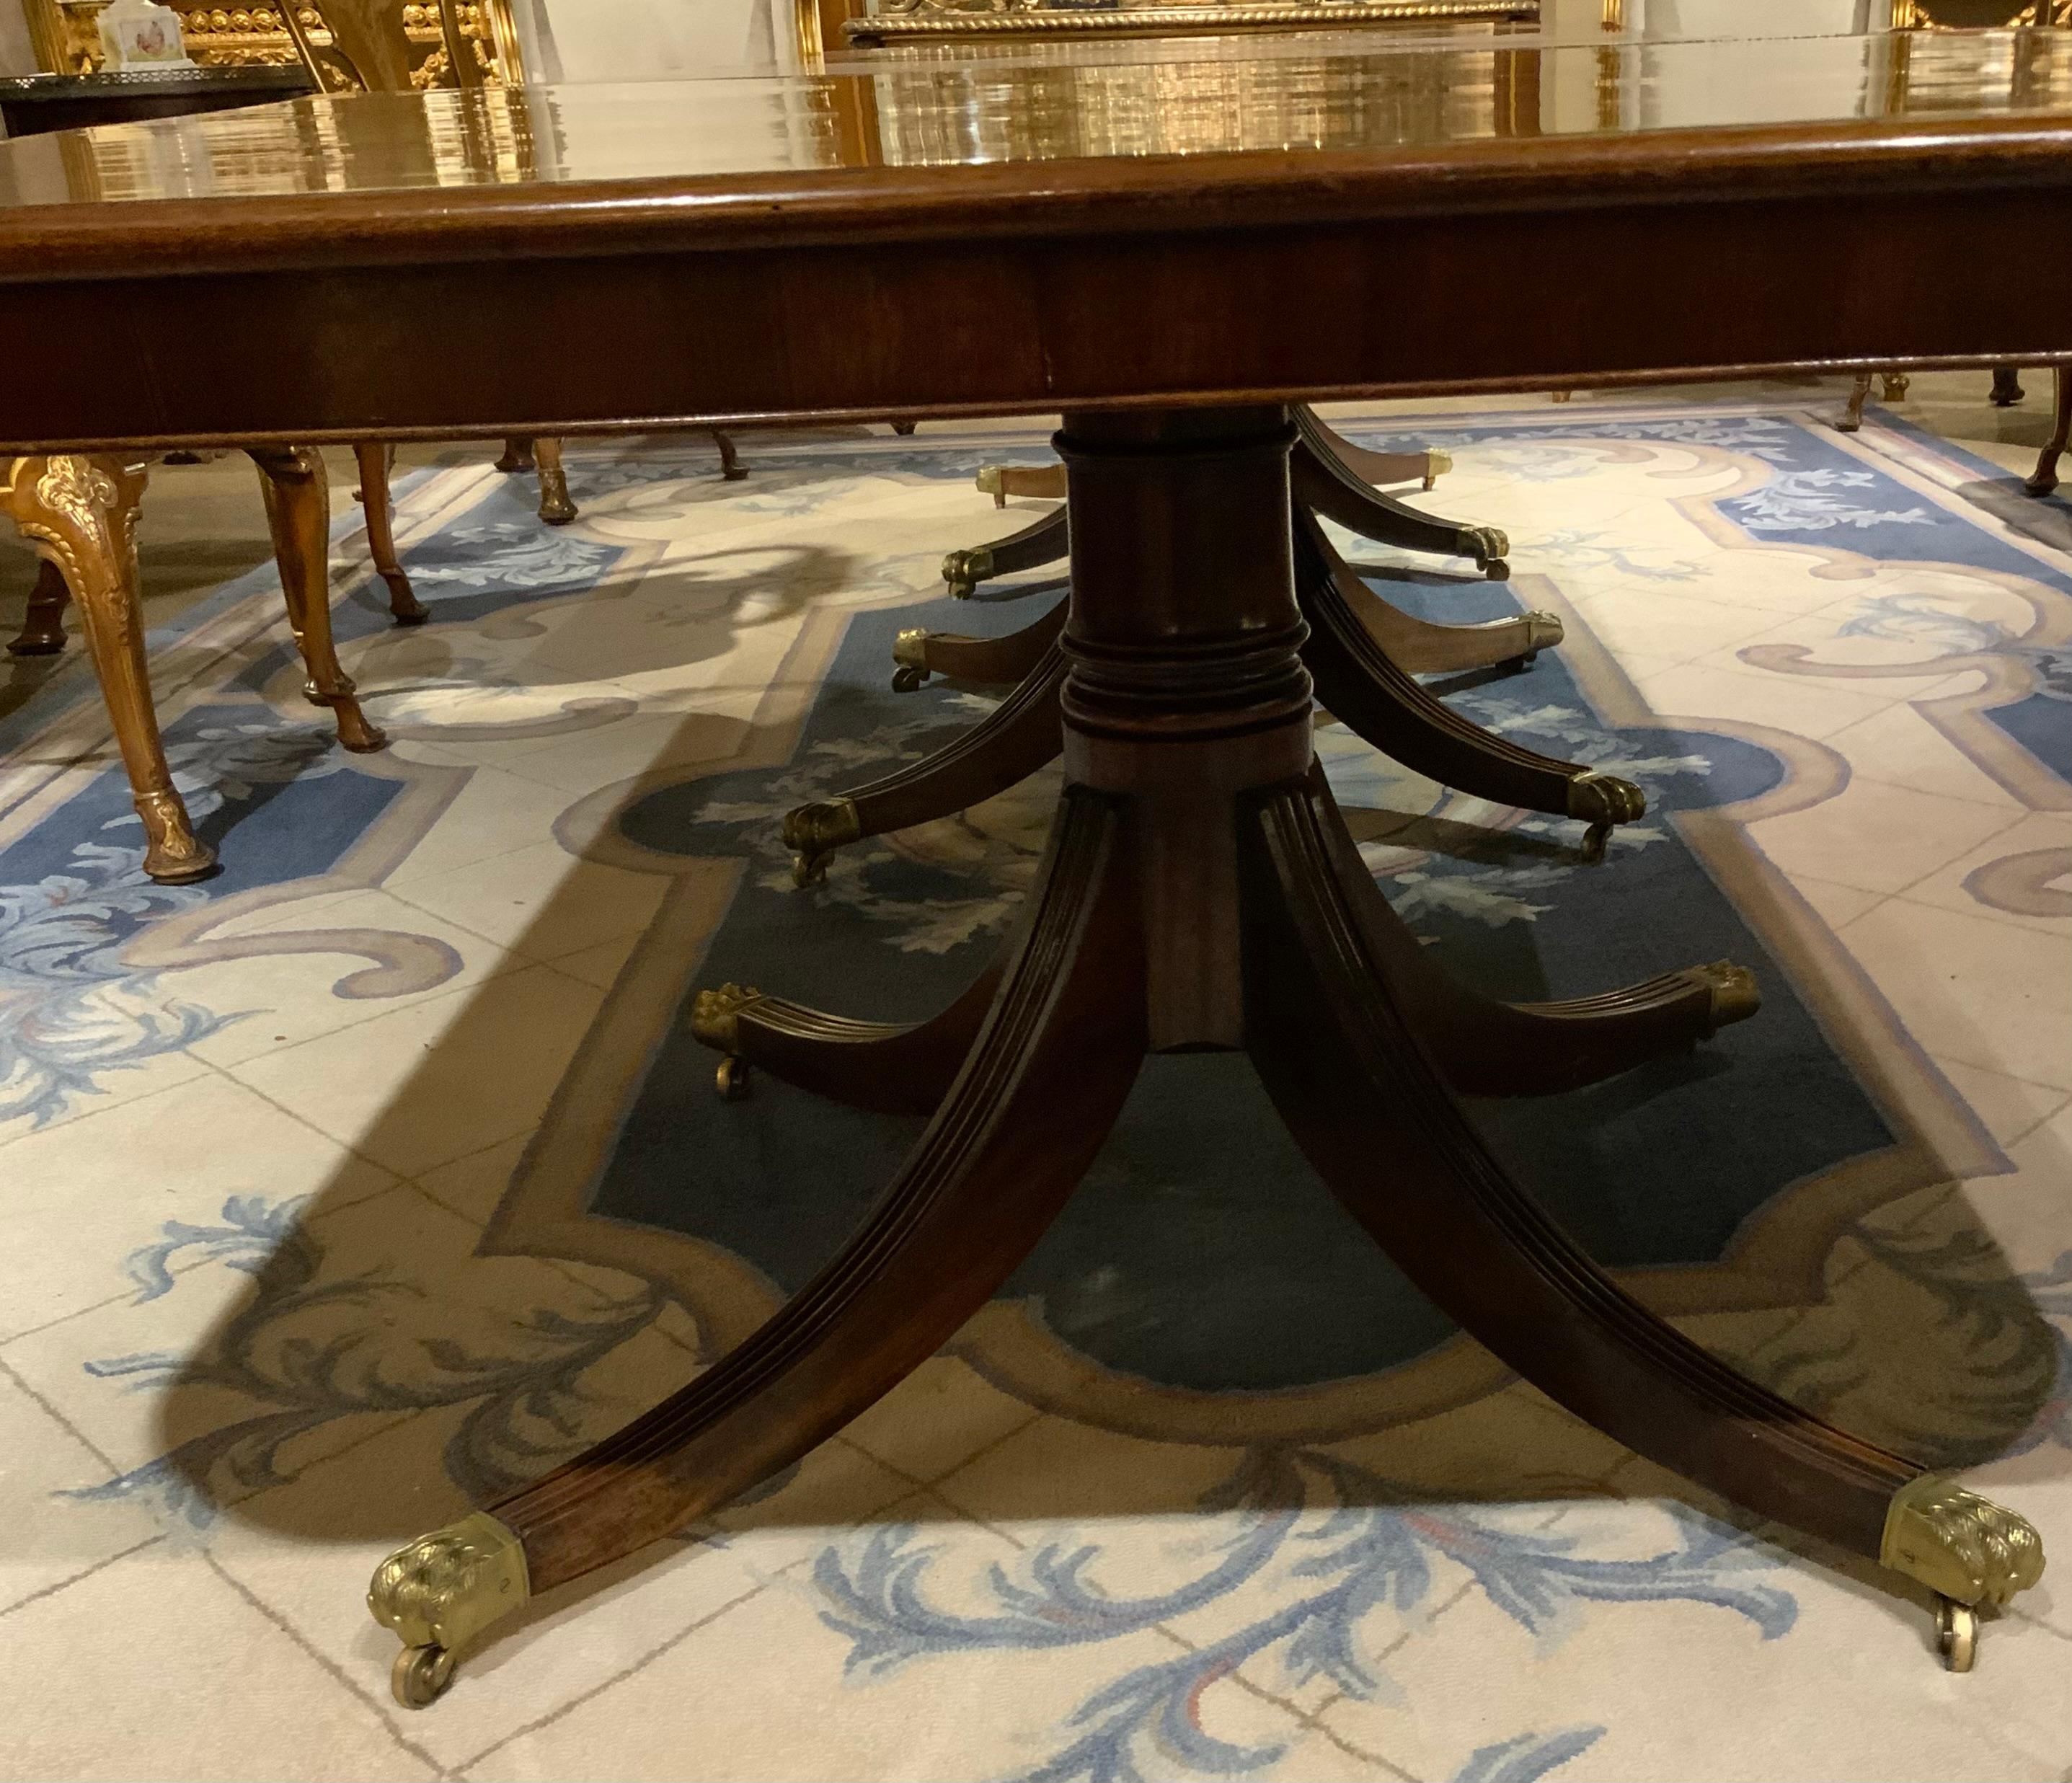 This English George III period mahogany table has three pedestals,
In the Sheraton taste, late eighteenth century, having a curved D end.
The top has been French polished and has a rich lustrous finish
Exhibiting the fine mahogany from which it